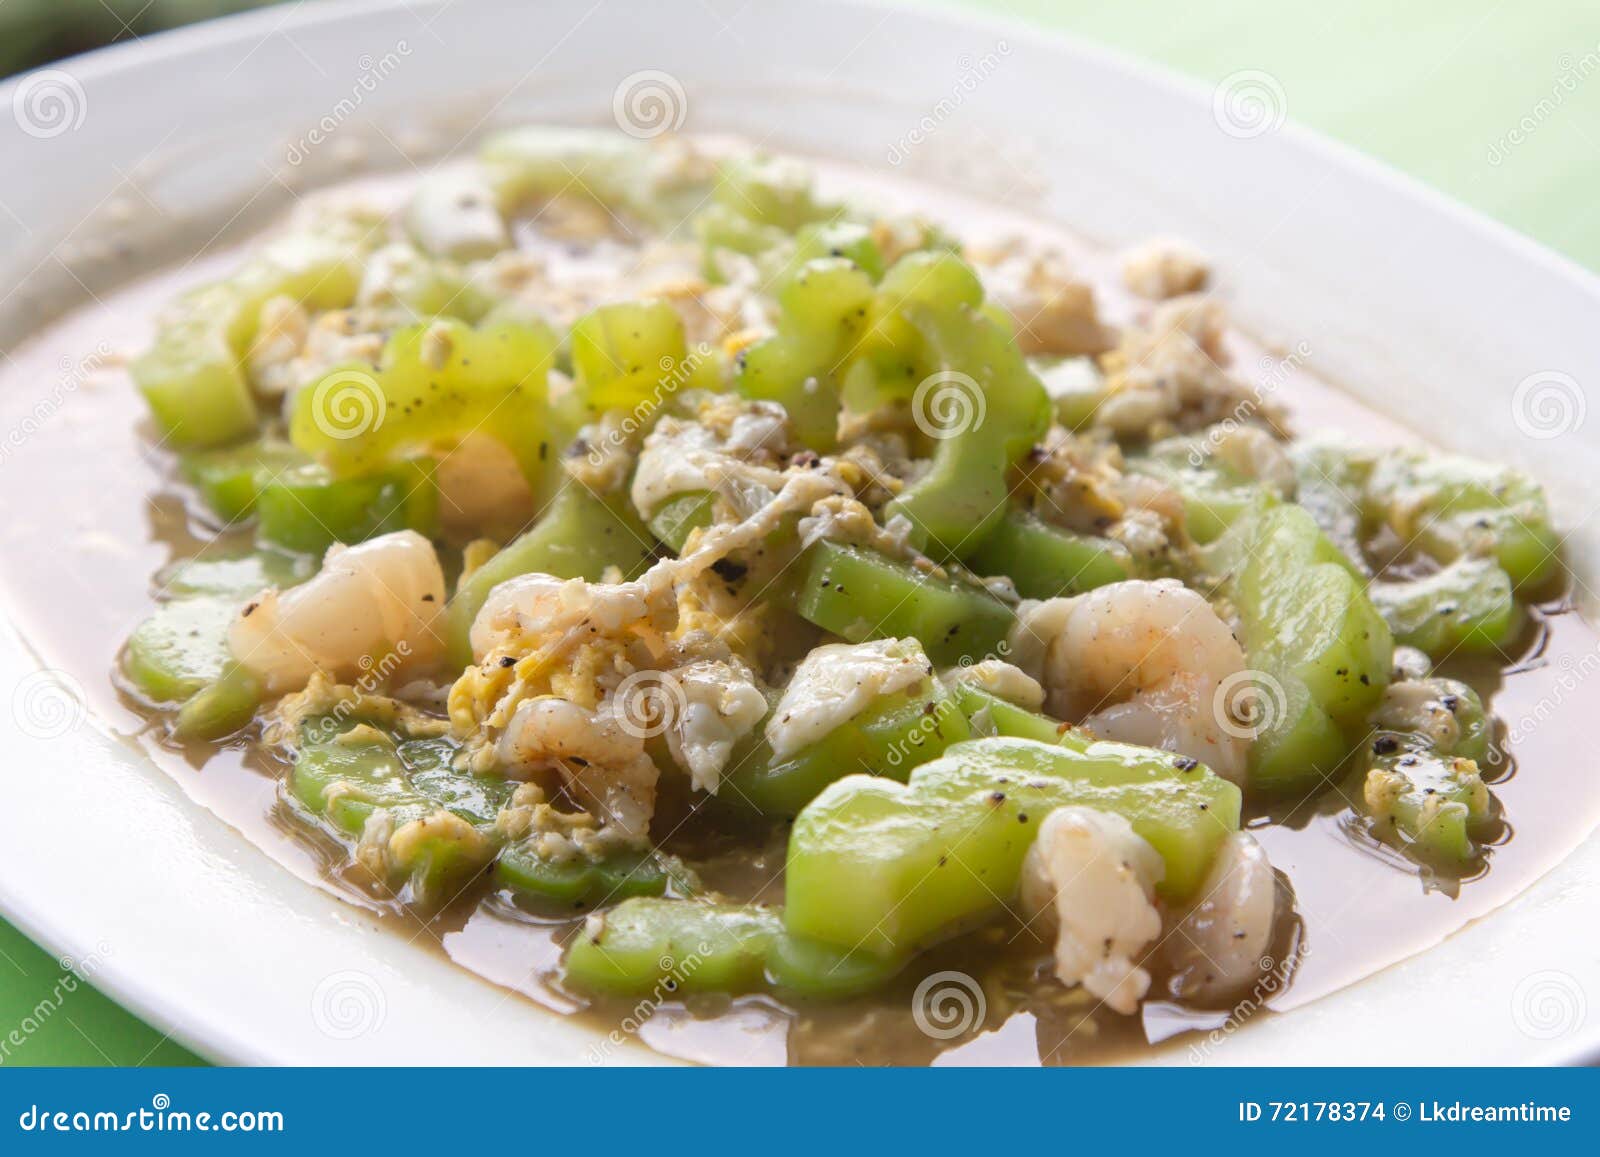 Stir Fried Bitter Gourd With Egg Stock Photo Image Of Bitterness Fruit 72178374